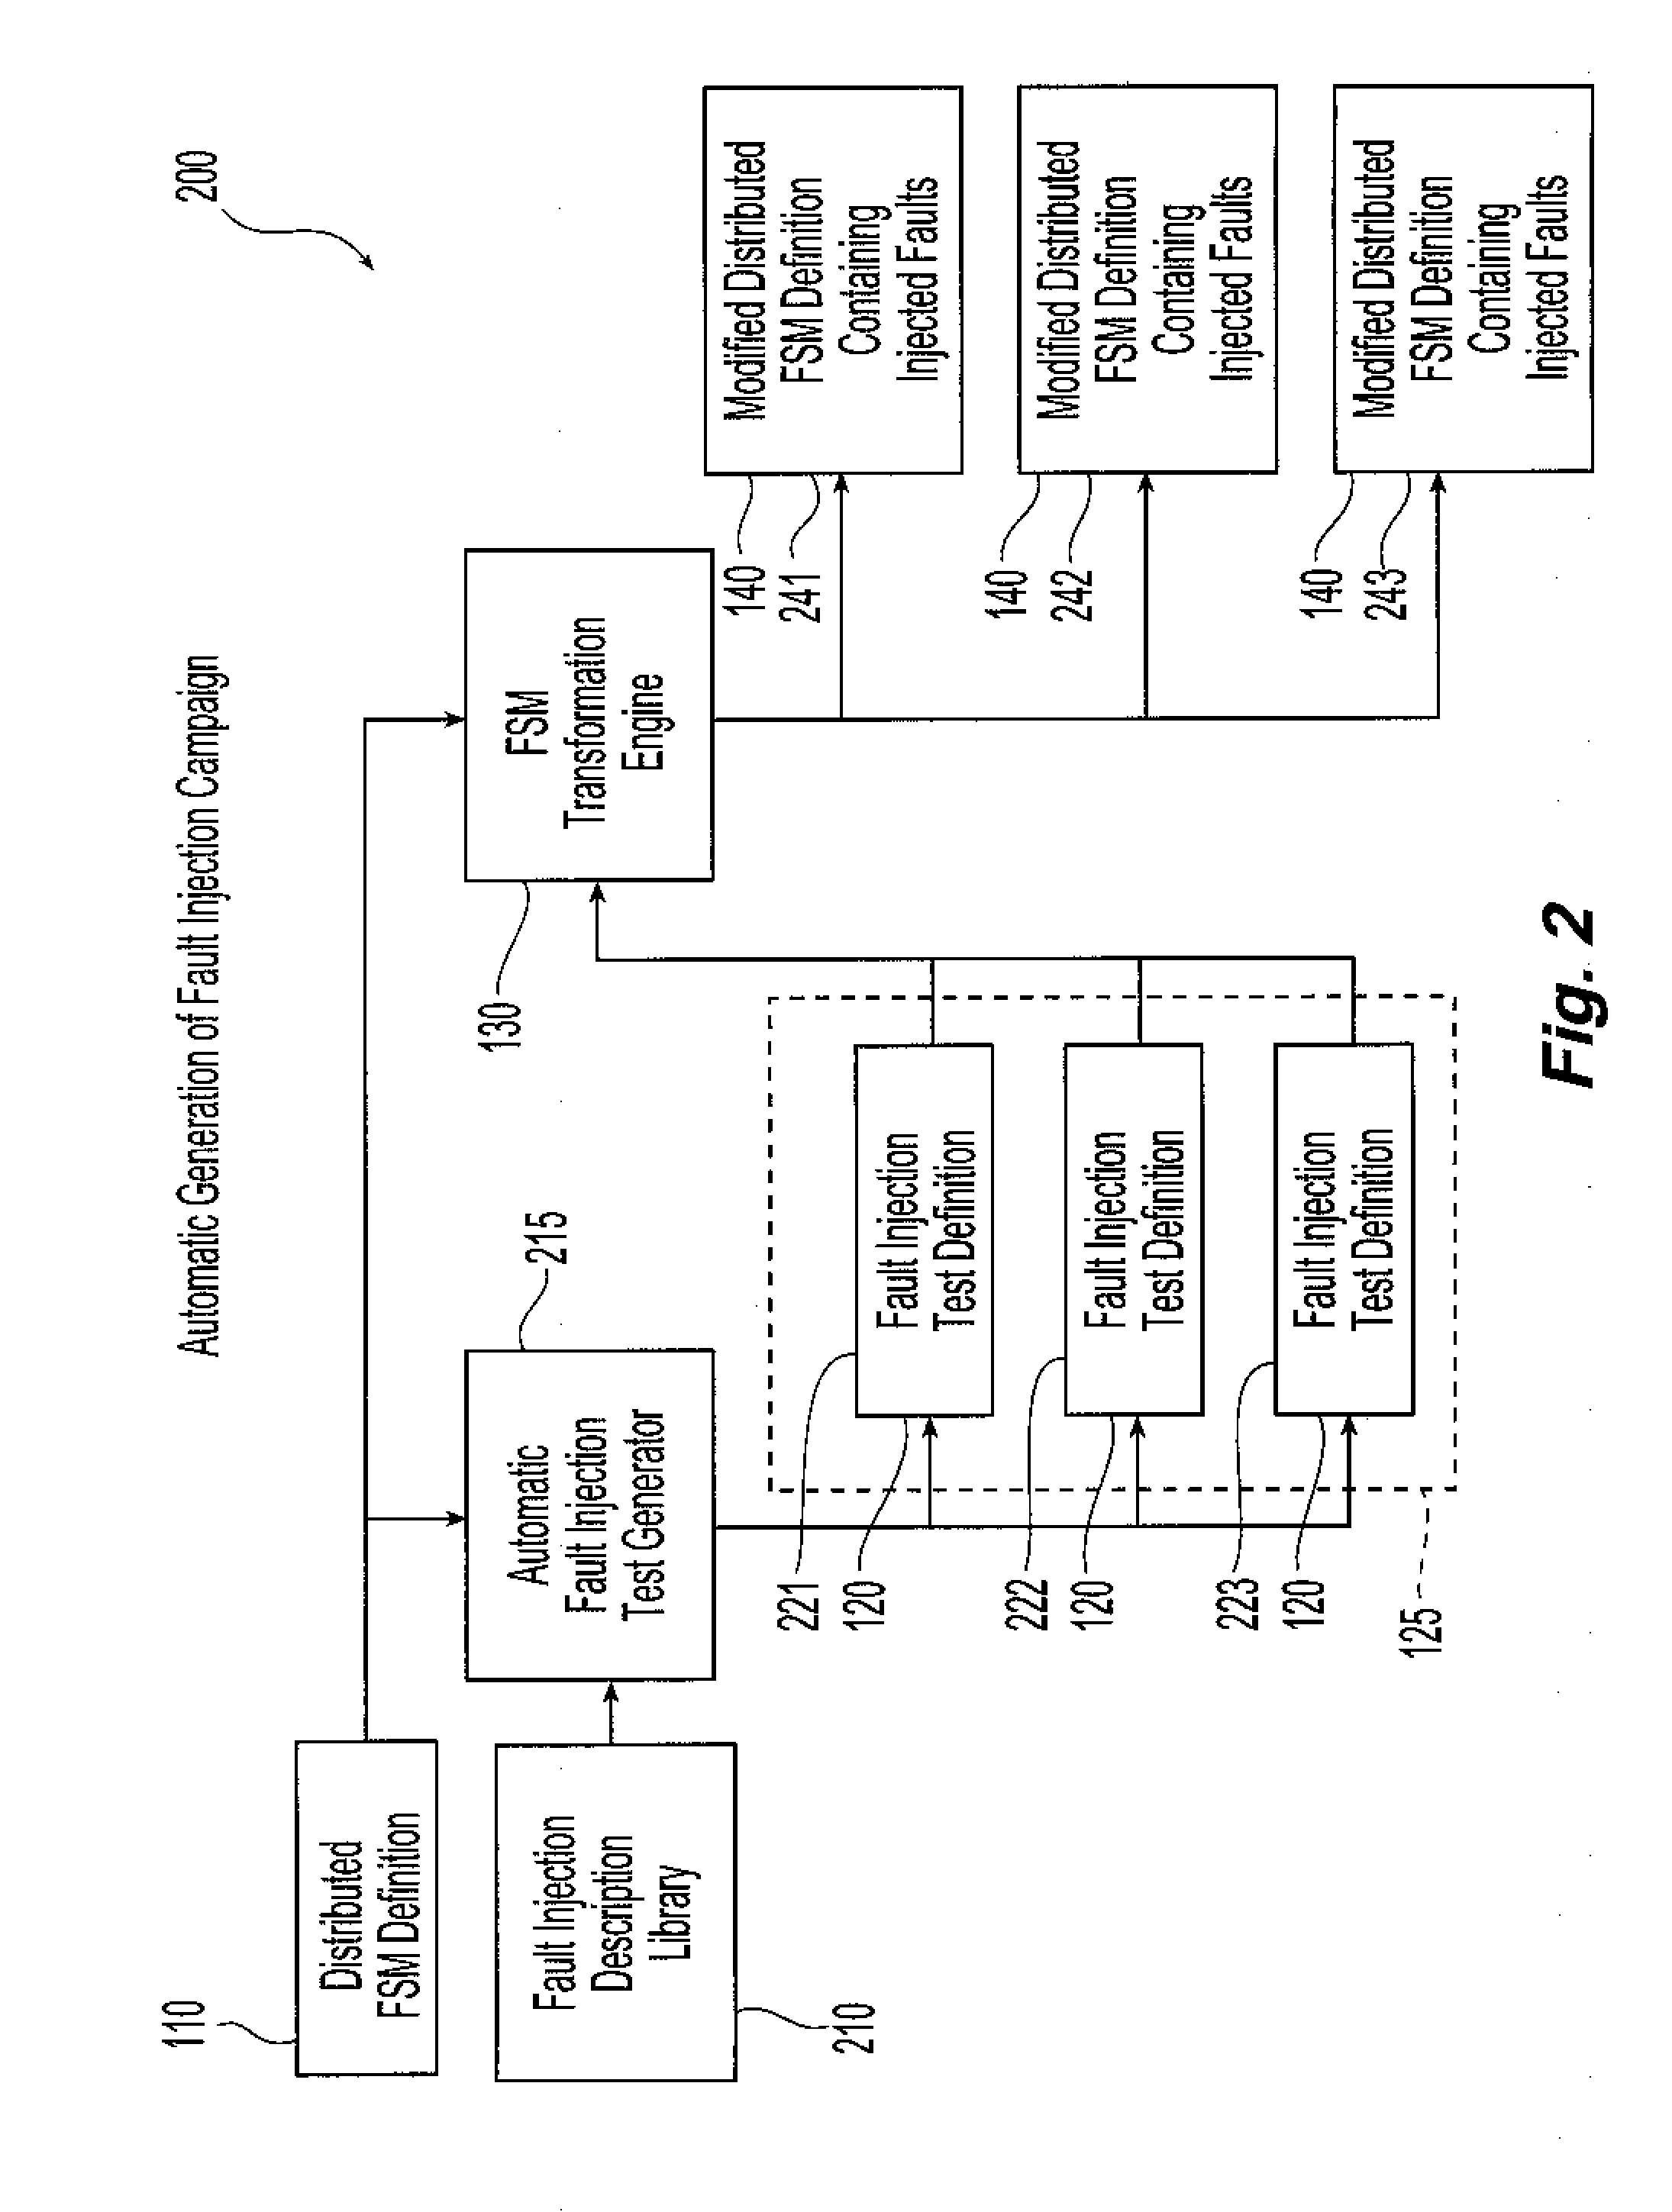 Distributed fault injection mechanism